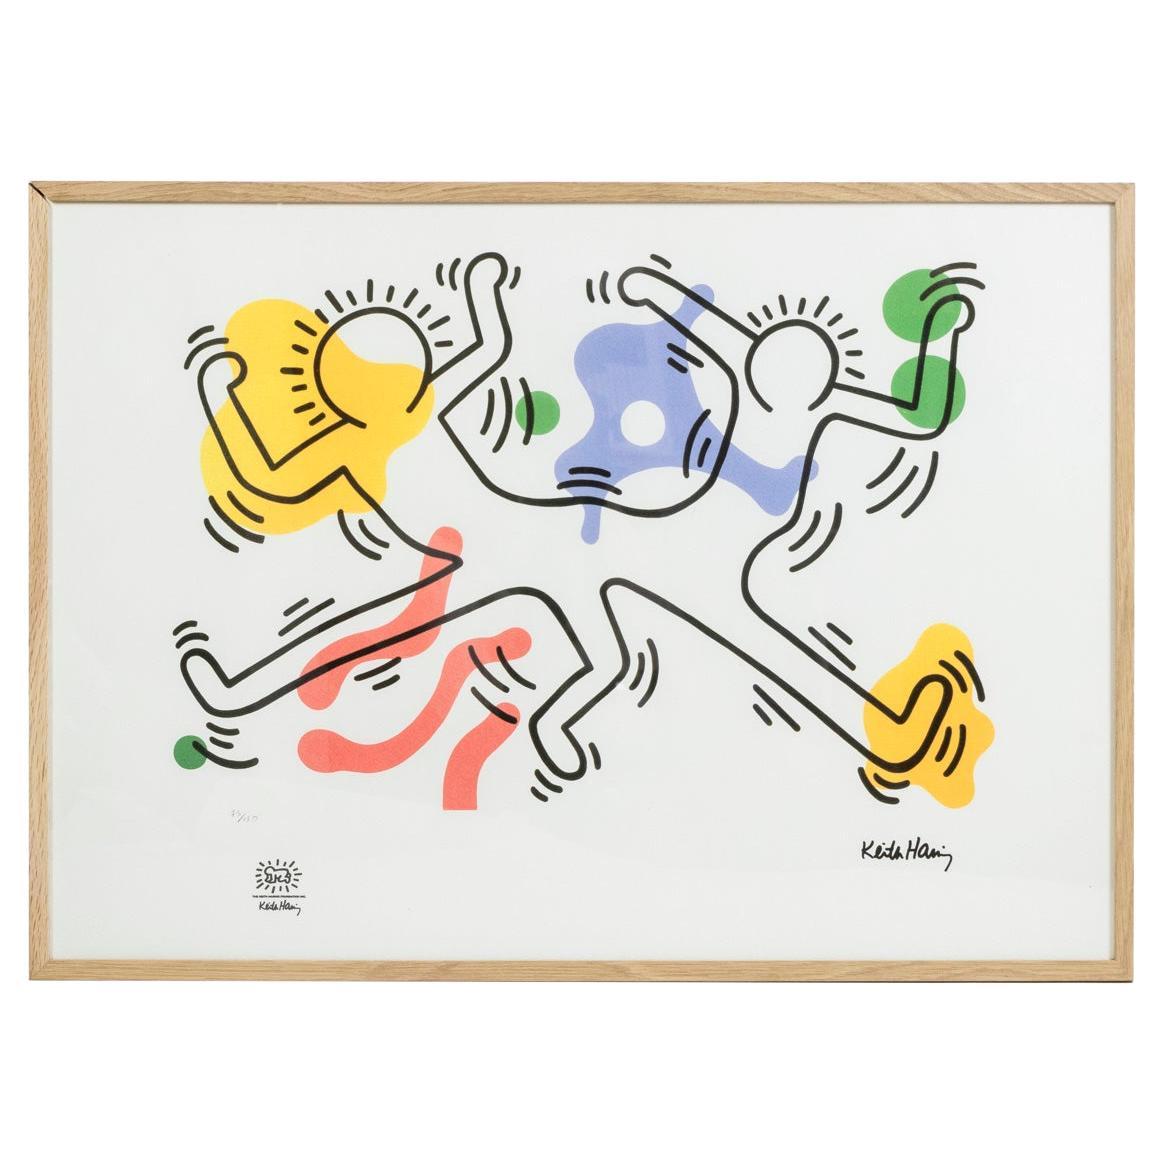 Who owns the rights to Keith Haring?